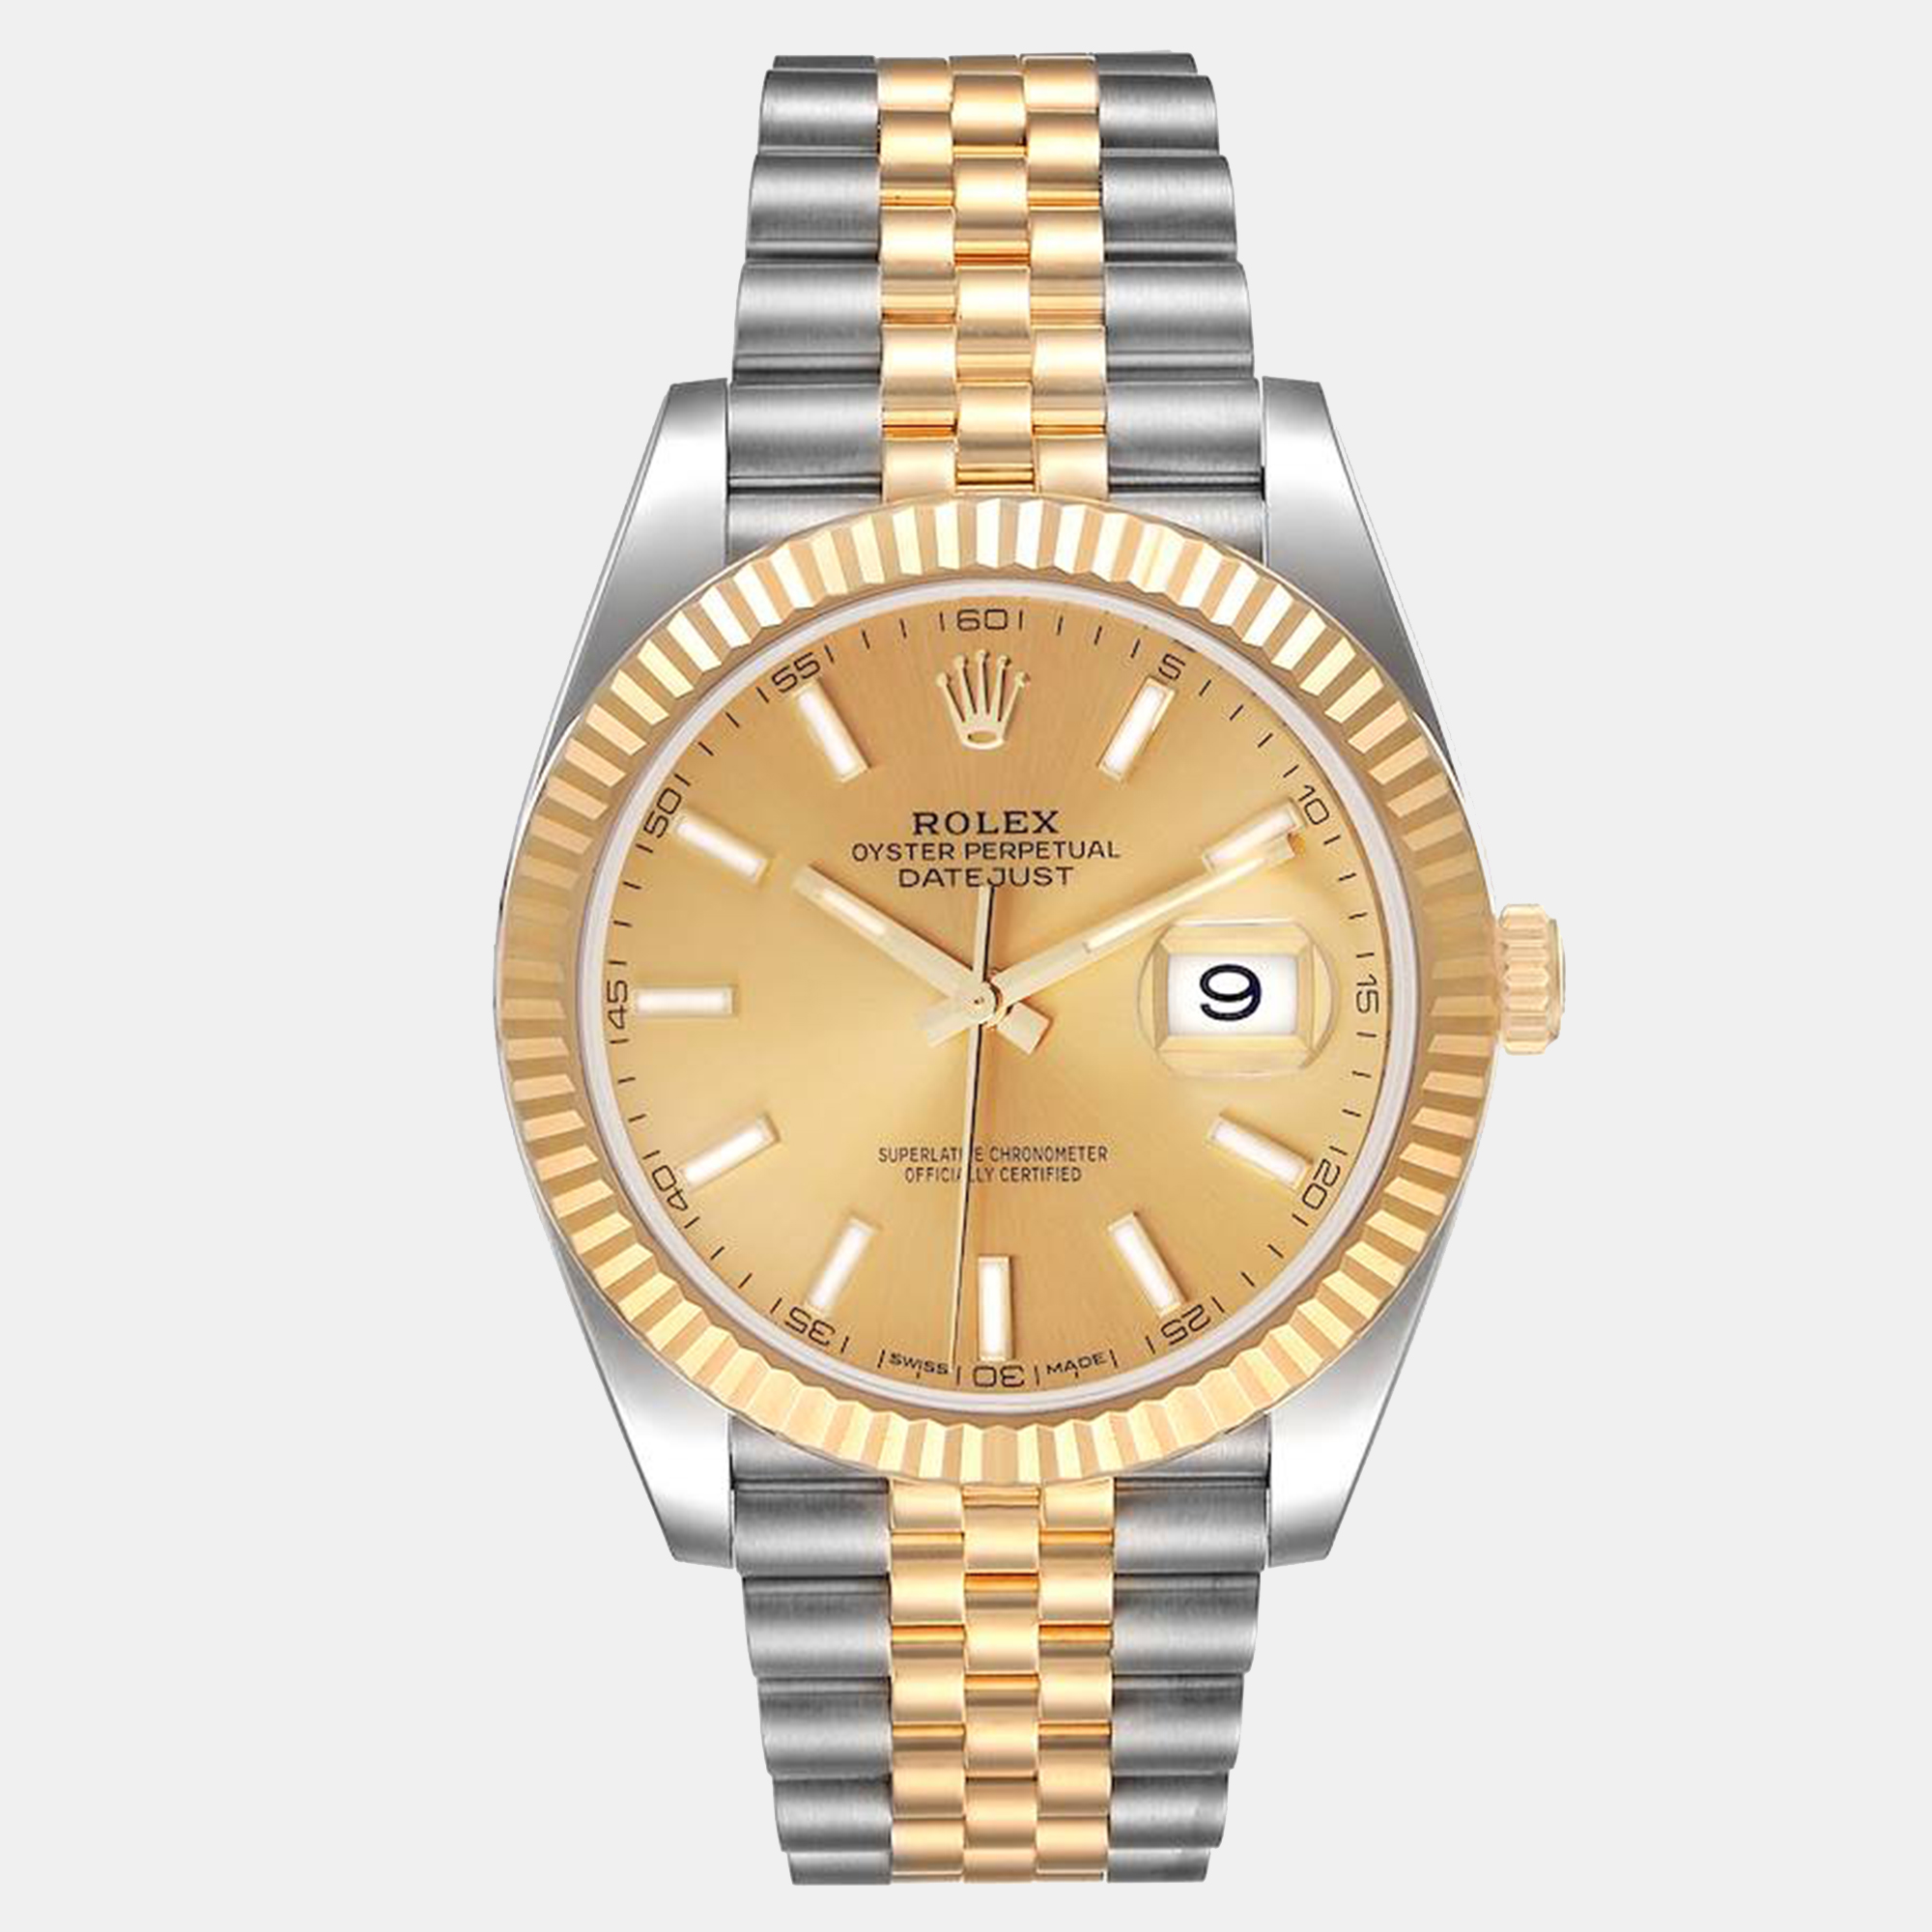 The Datejust is one of the most recognized and coveted watches from the house of Rolex. It has a distinct look and an irrefutable appeal. Crafted in stainless steel and 18k yellow gold this authentic Rolex Datejust wristwatch has the signature allure.